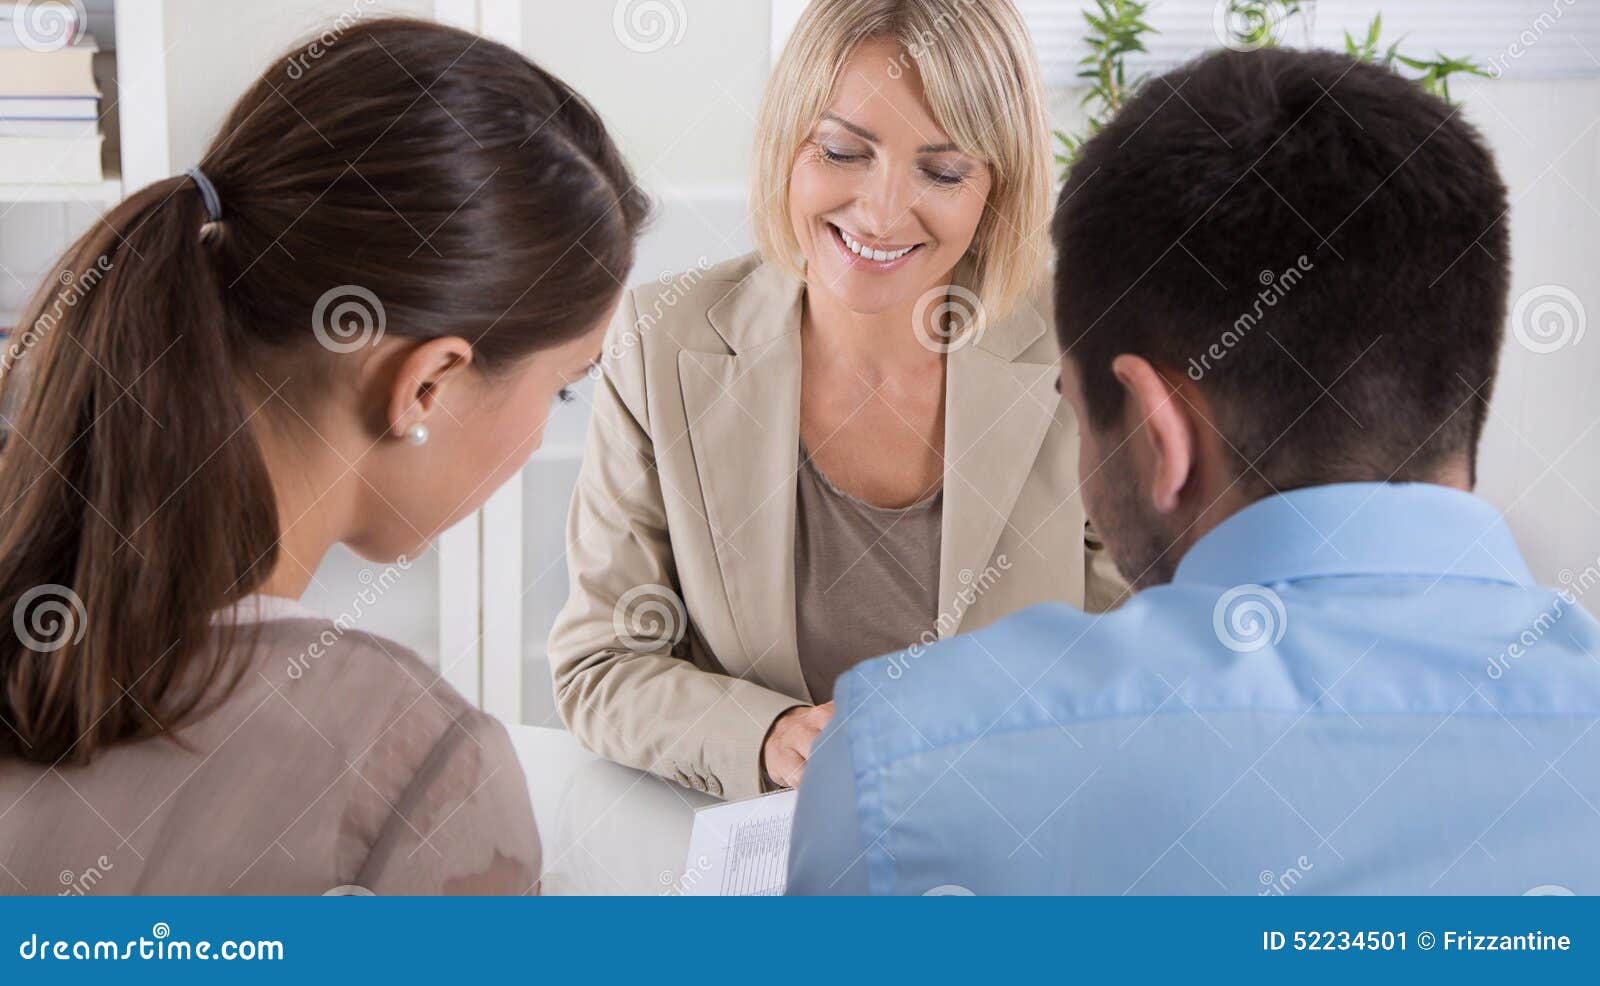 adviser, broker and customers sitting at desk in the office.